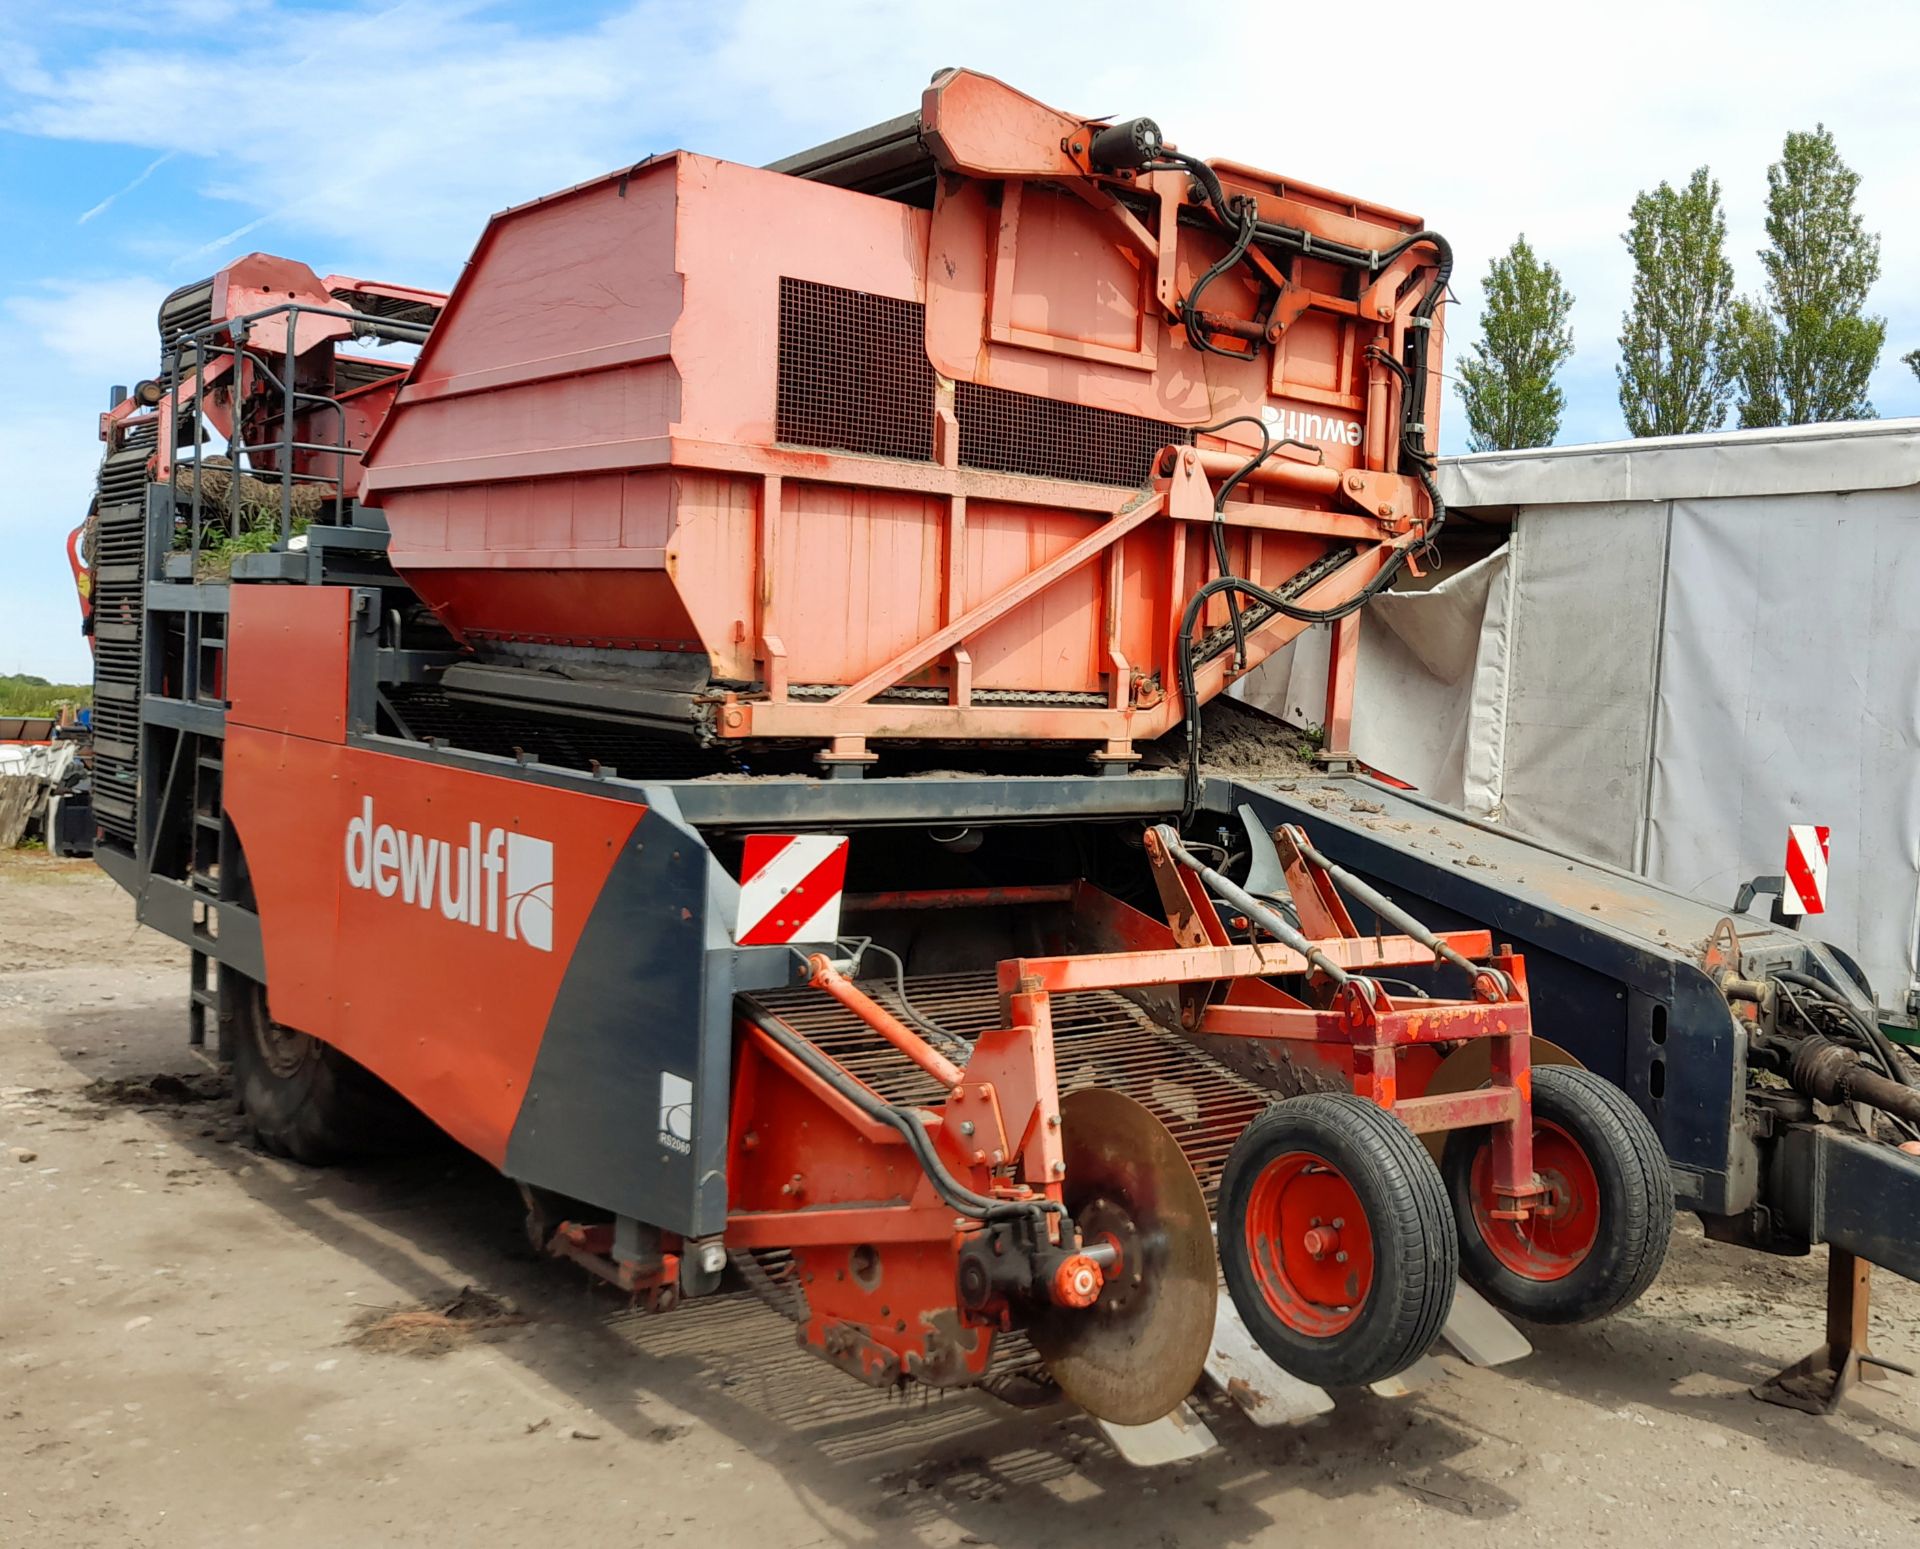 Dewulf RS2060 Trailed 2-Row Sieving Harvester, Serial Number 5811679, Year 2011 - Image 10 of 10